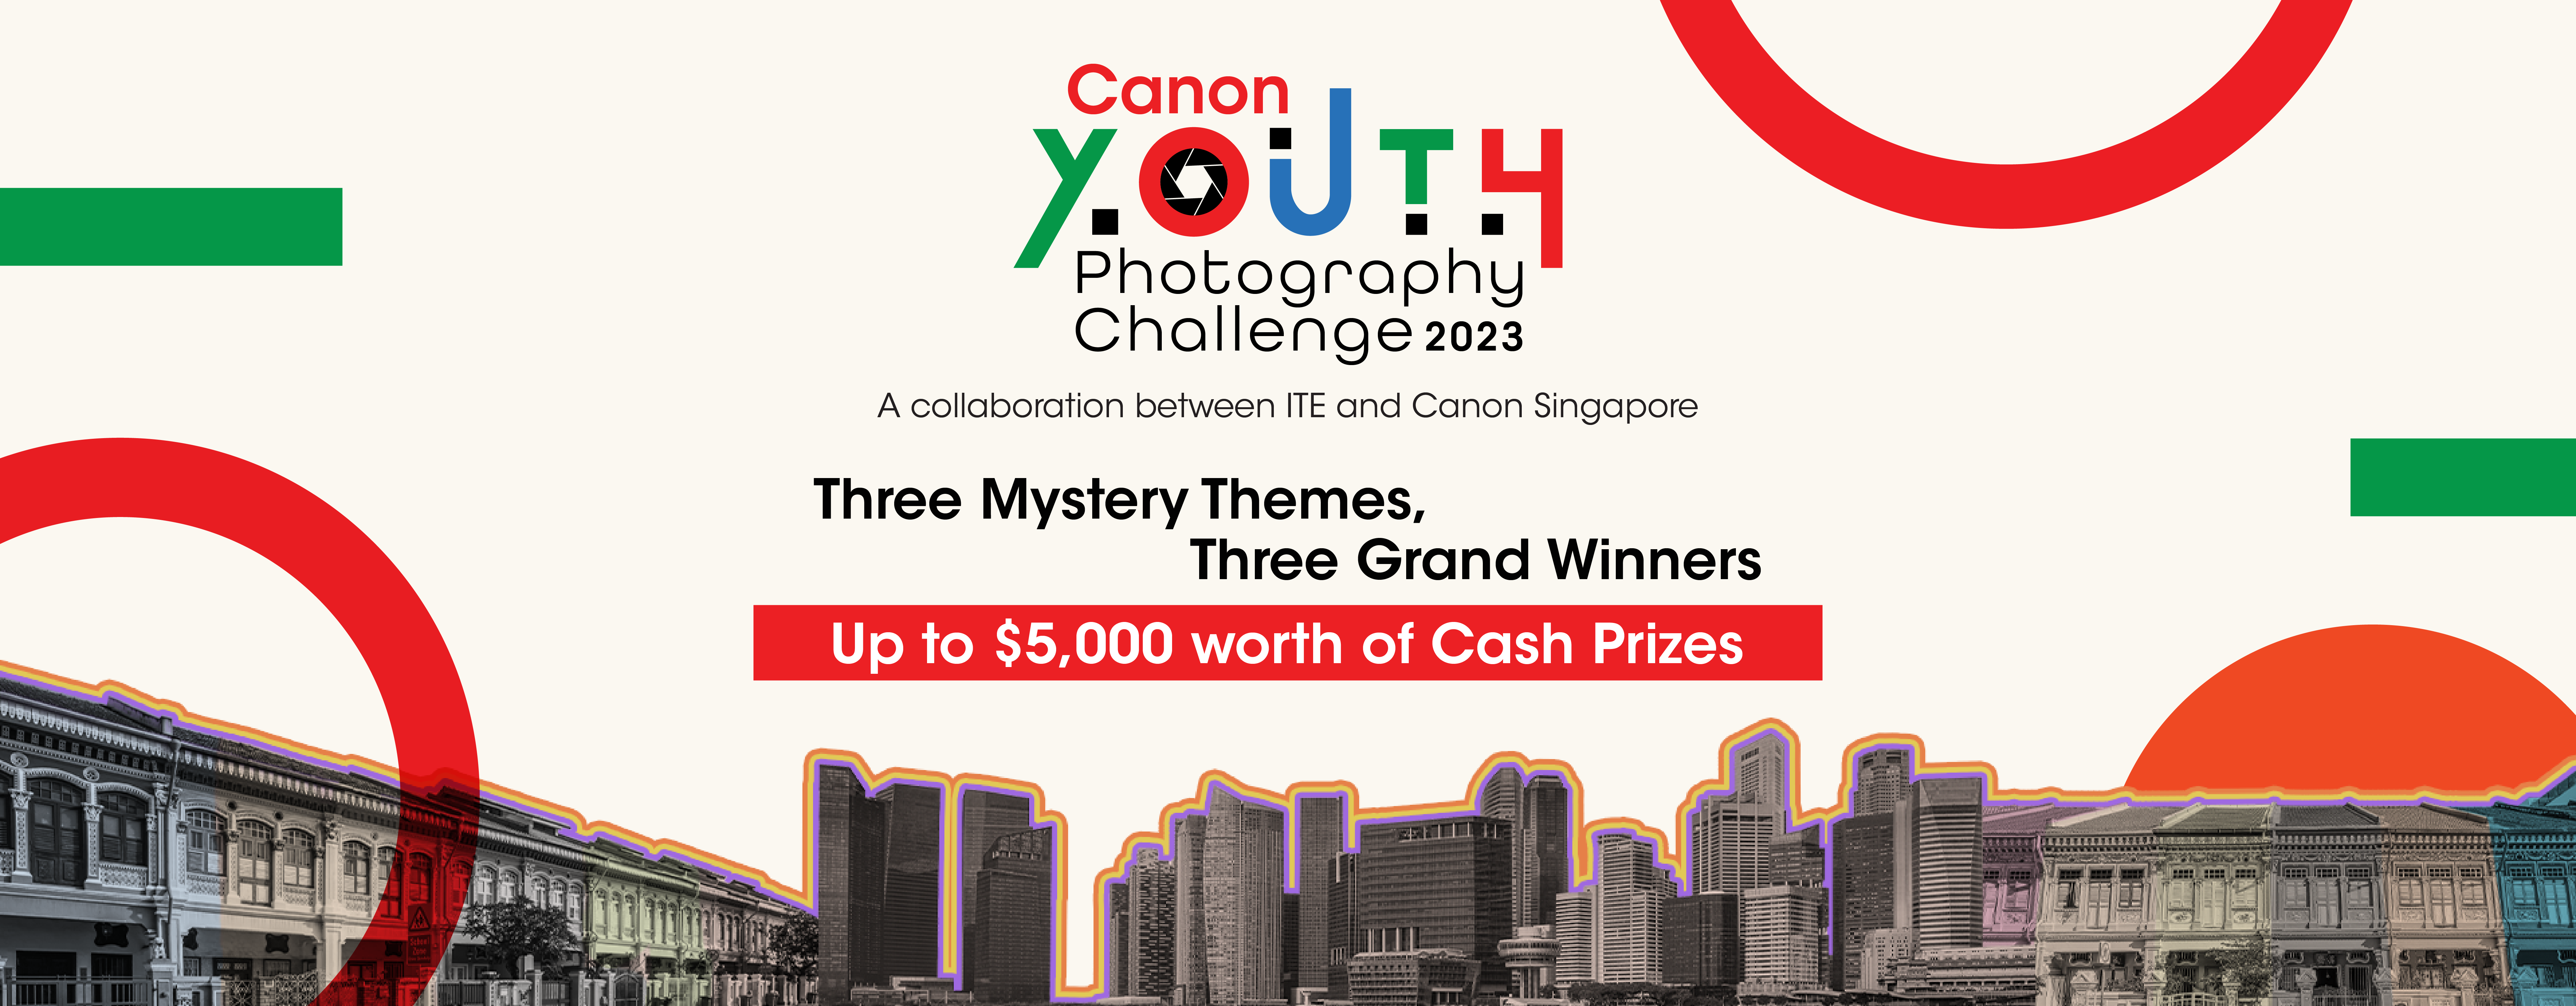 Canon_Youth_Photography_Challenge-web_v3.png